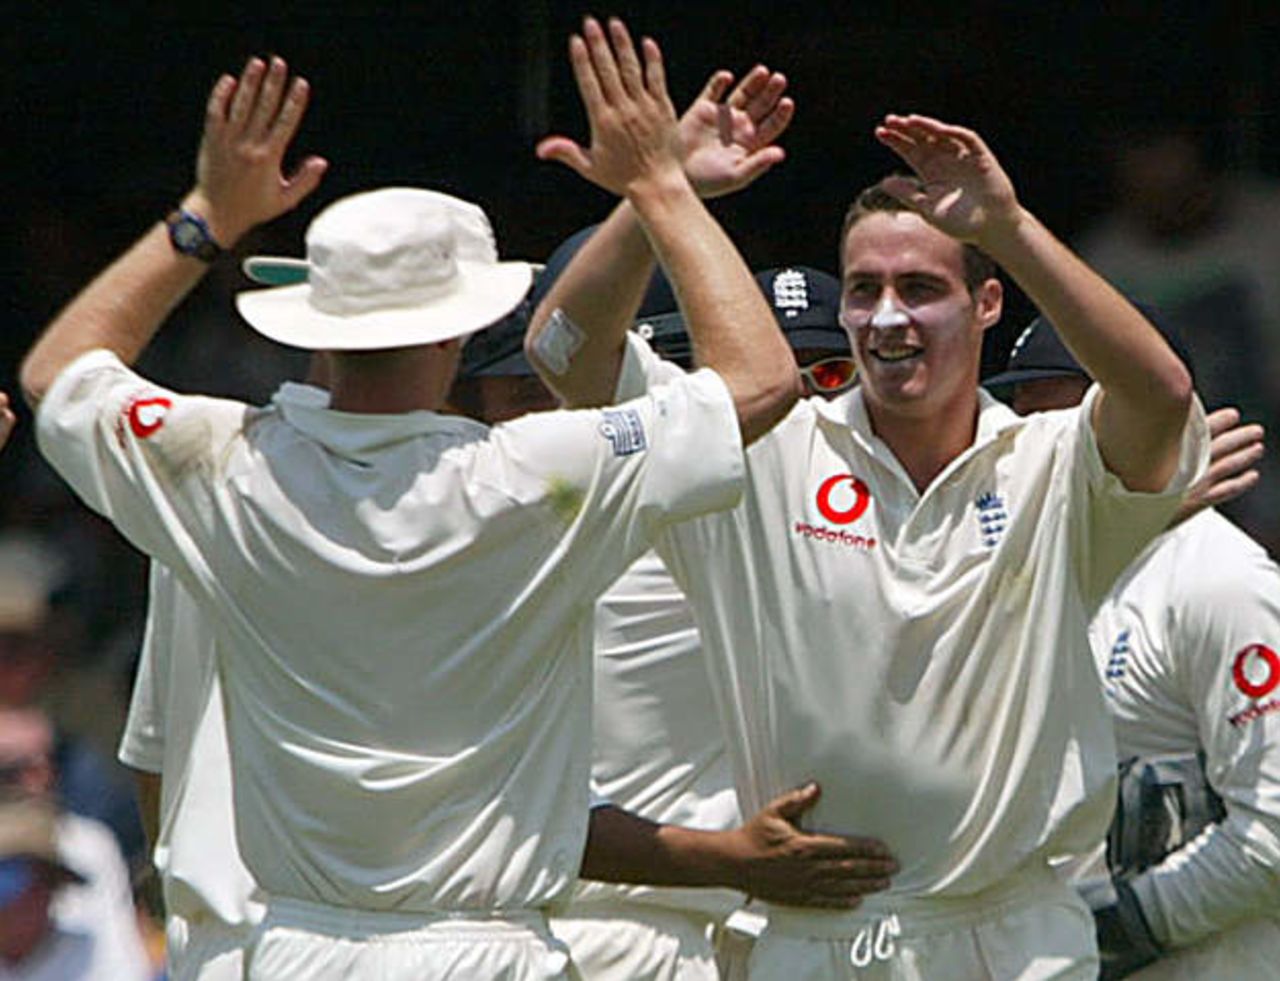 England's Simon Jones (R) celebrates with team-mates after taking the wicket of Australia's Justin Lager for 32 runs during the first day's play in the first Ashes test match at the Gabba in Brisbane November 7, 2002.